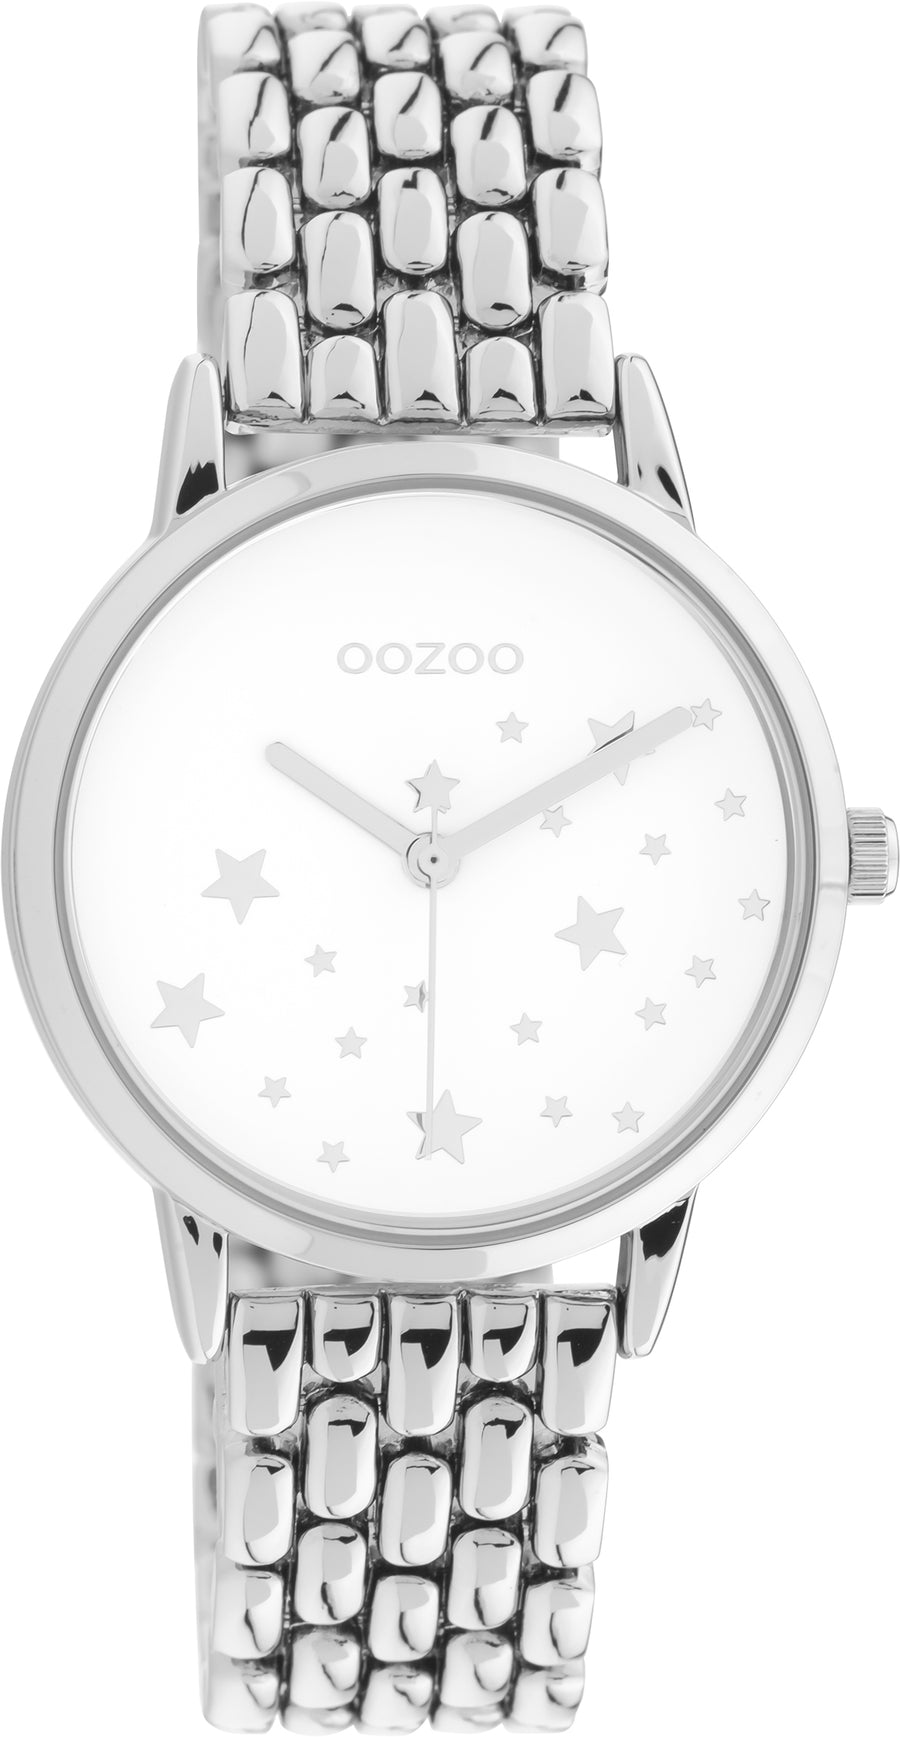 Oozoo Timepieces C11025 white silver 34mm